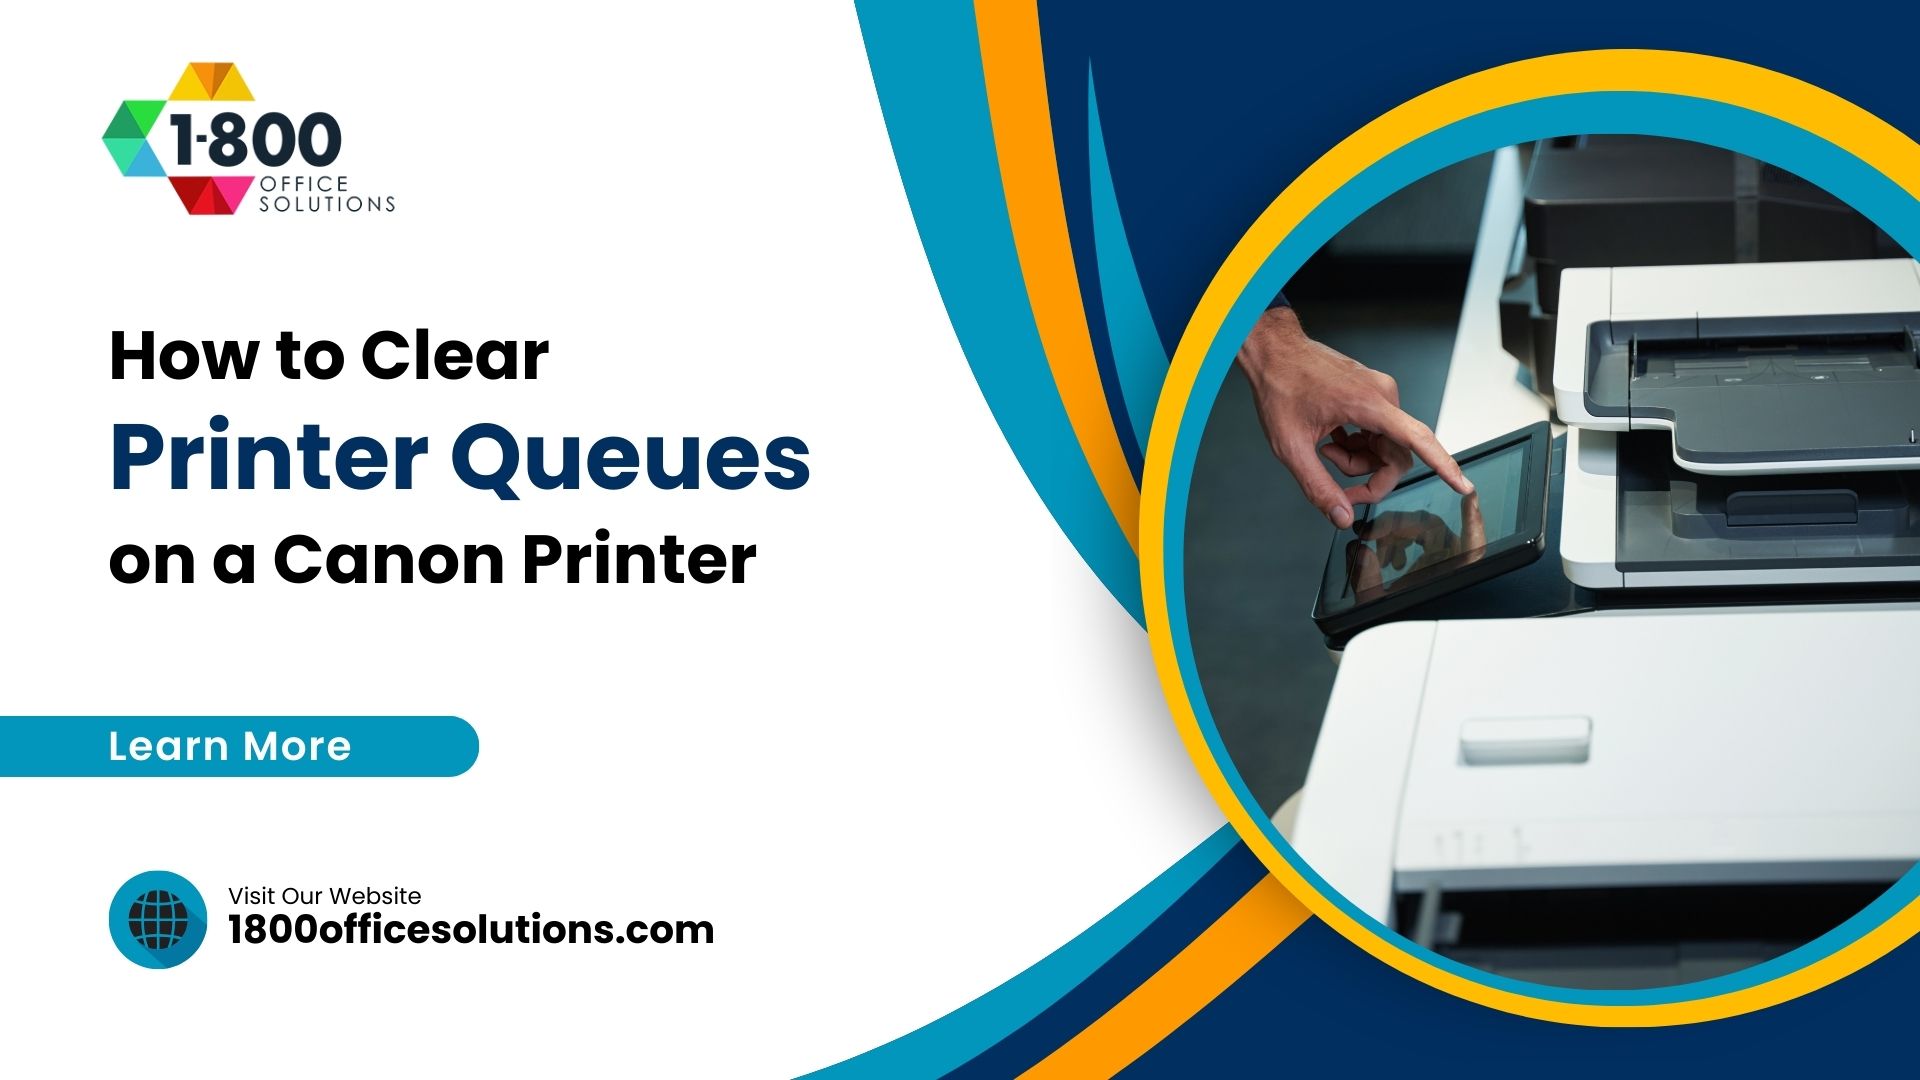 How to Clear Printer Queues on a Canon Printer